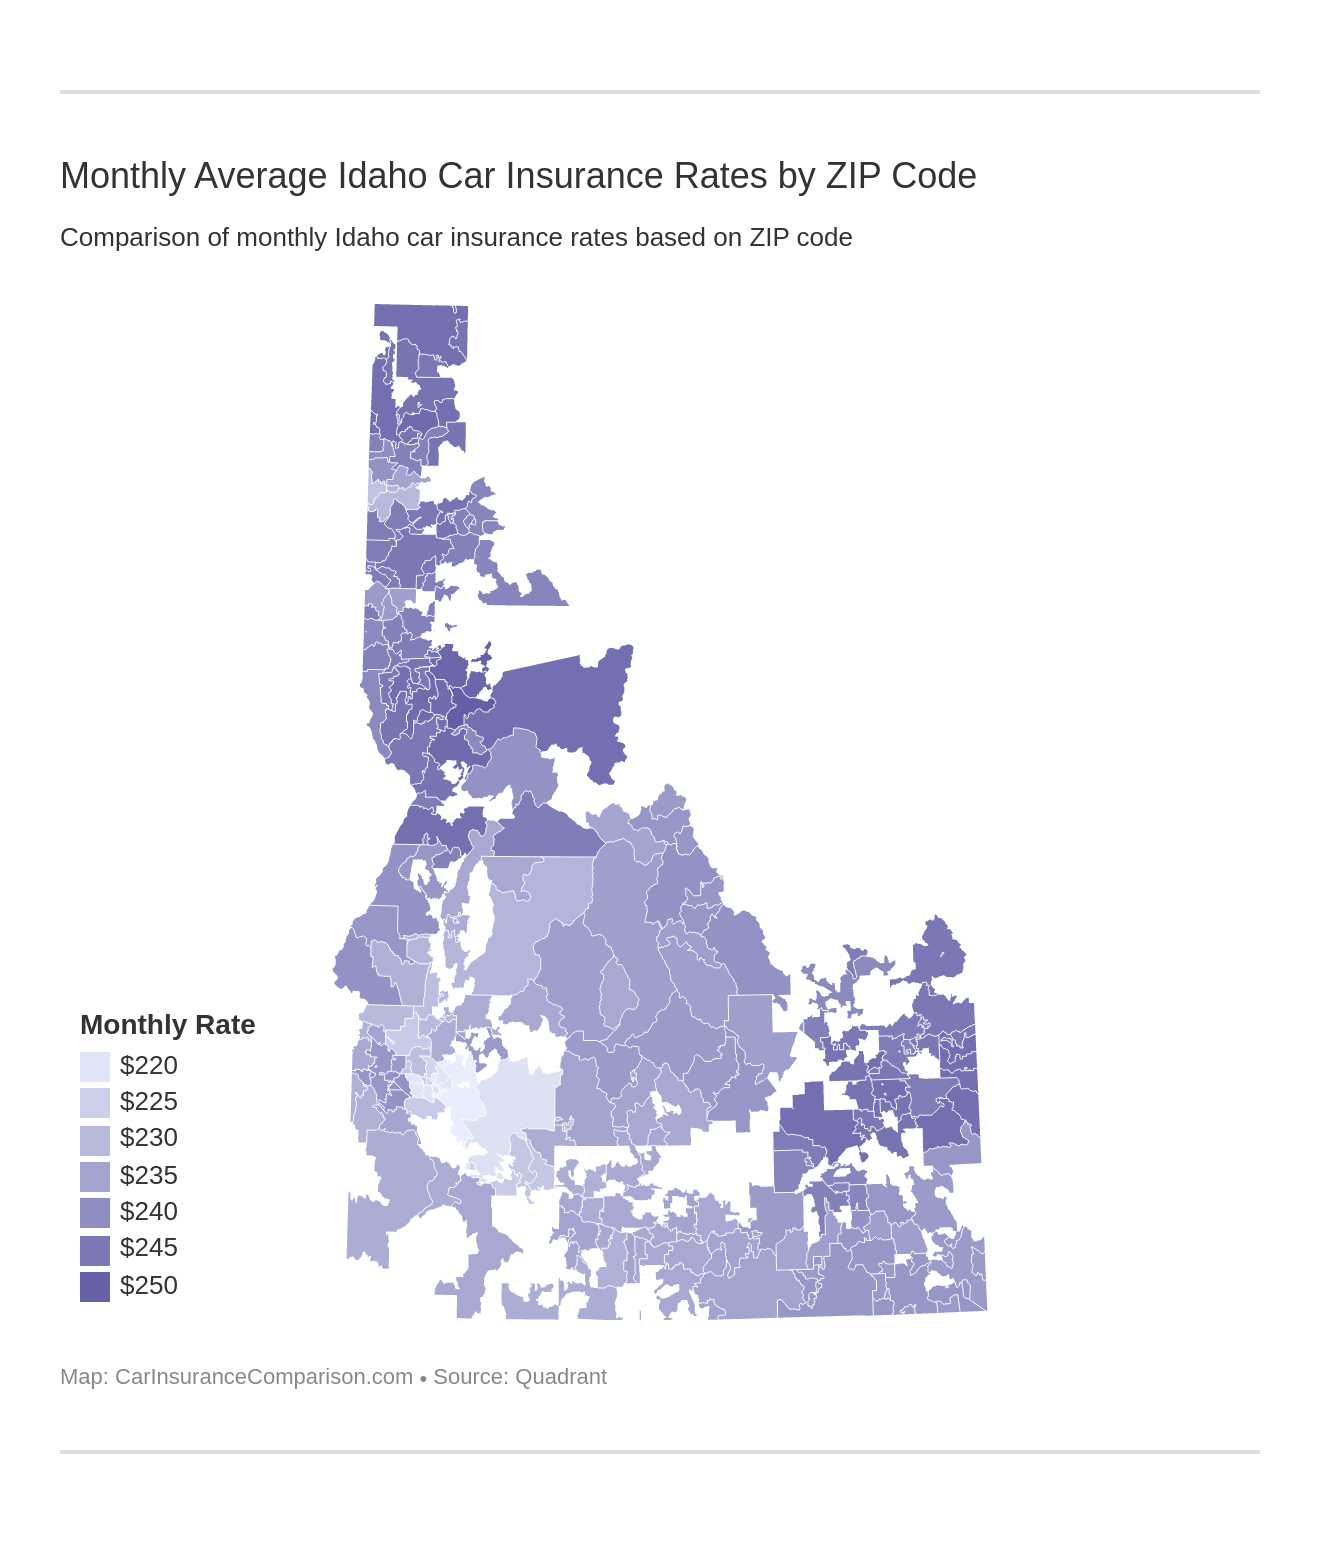 Monthly Average Idaho Car Insurance Rates by ZIP Code